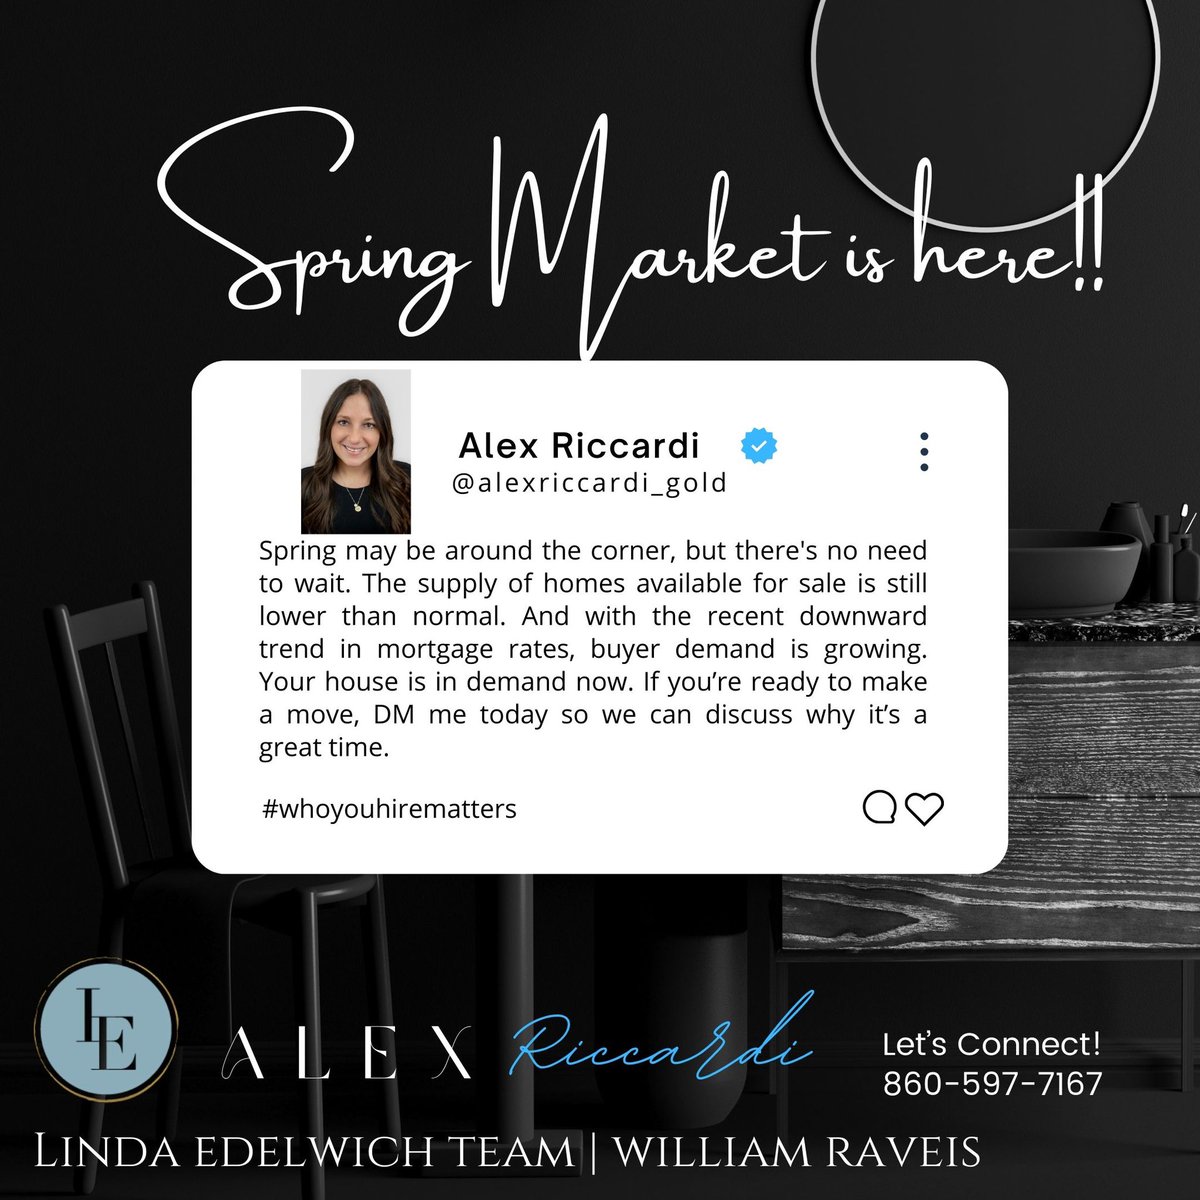 In the real estate world, spring has sprung! 🏠🌸Let’s connect!

Email: Alex.riccardi@raveis.com
Phone: 860-597-7167

#whoyouhirematters #ctrealestate #ctrealtor #westhartford